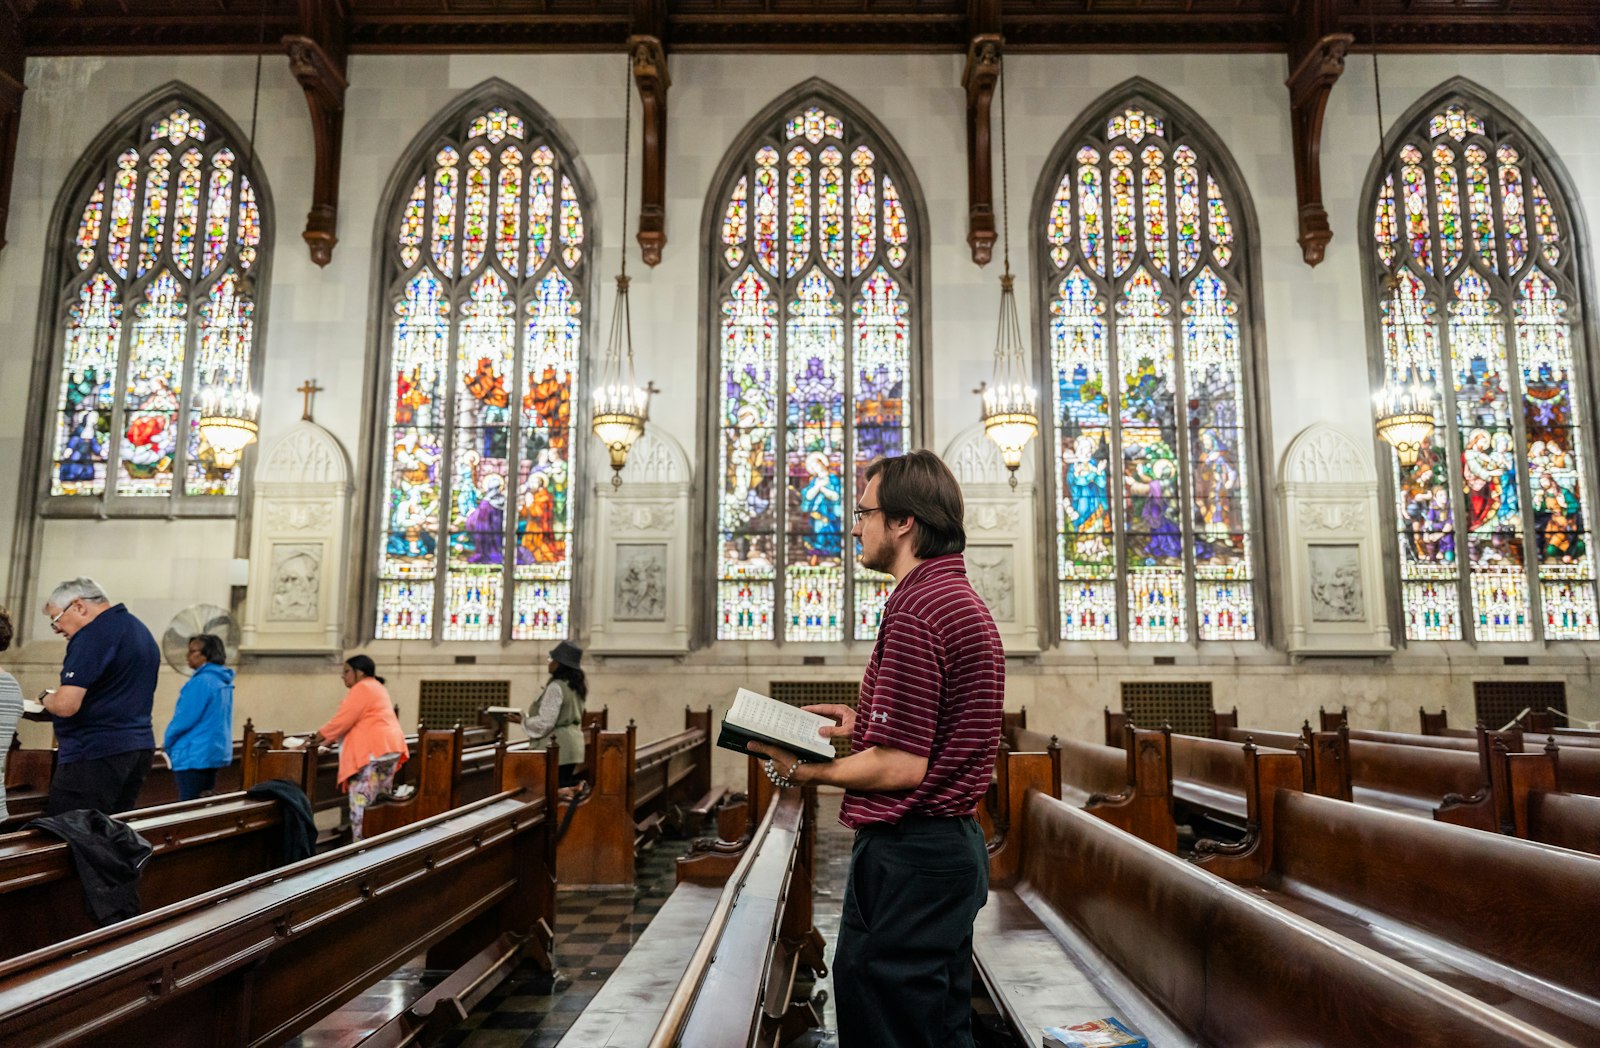 Schuelke's pilgrimage began in earnest in 2018, after he realized he'd attended Mass at five different churches during Lent. He created a spreadsheet and realized he's already attended dozens of parishes in the archdiocese, and set out to finish them all.